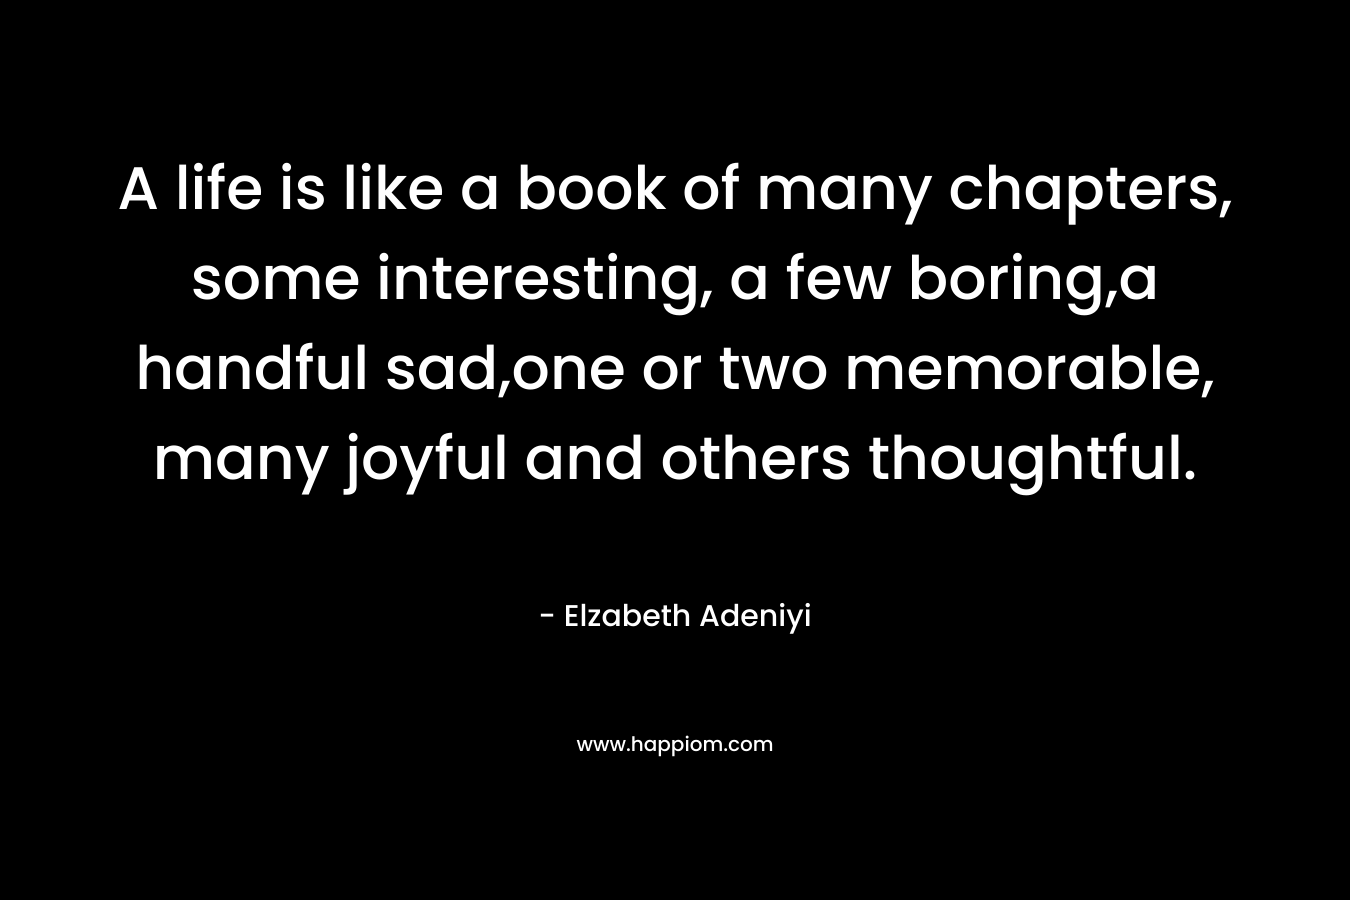 A life is like a book of many chapters, some interesting, a few boring,a handful sad,one or two memorable, many joyful and others thoughtful. – Elzabeth Adeniyi